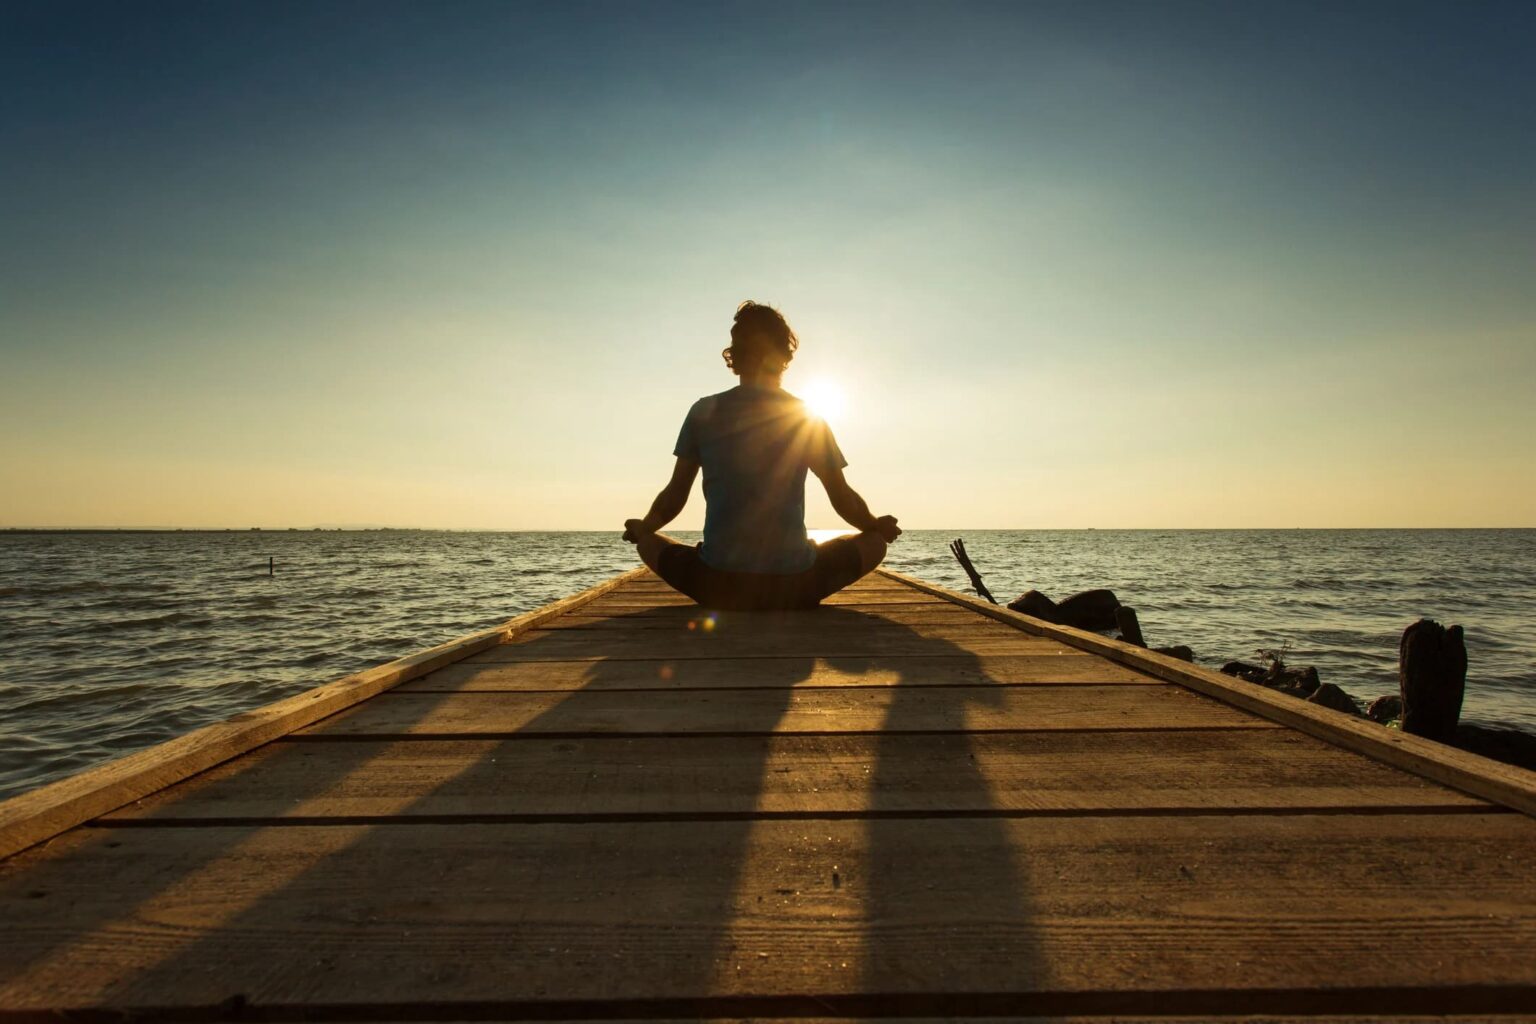 Meditation can improve your health and transform your state of mind. Start meditating today by taking advantage of these tips from Jonah Engler.